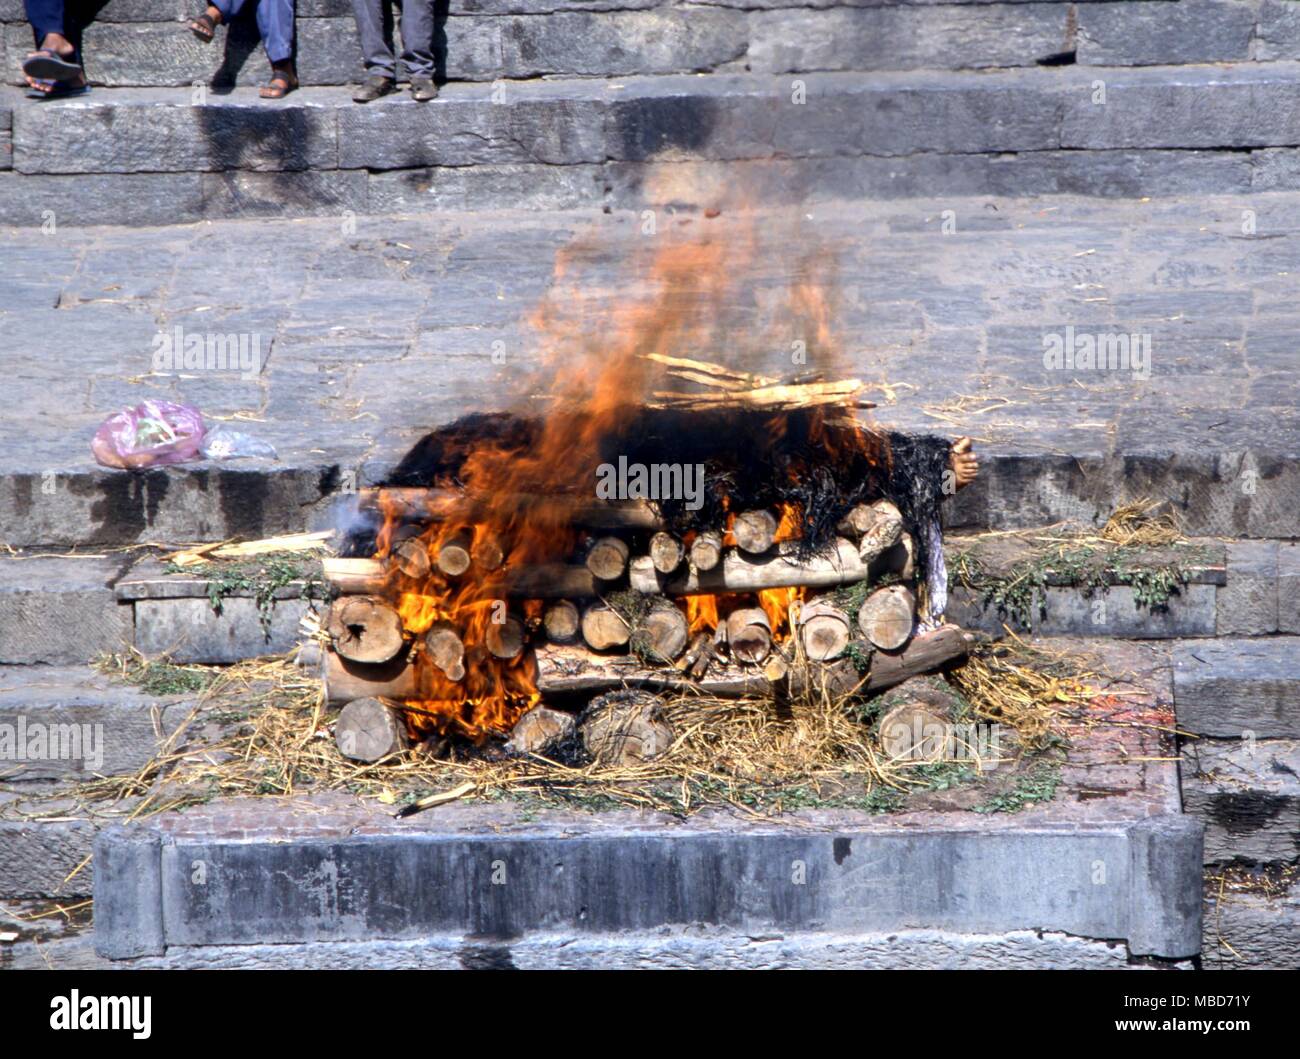 Death - Hindu cremation - Cremation of a dead body by the Bagmati River (Kathmandu valley). The corpse, removed of its clothing beneath the straw, is burned. The ashes are then thrown into the river. Stock Photo